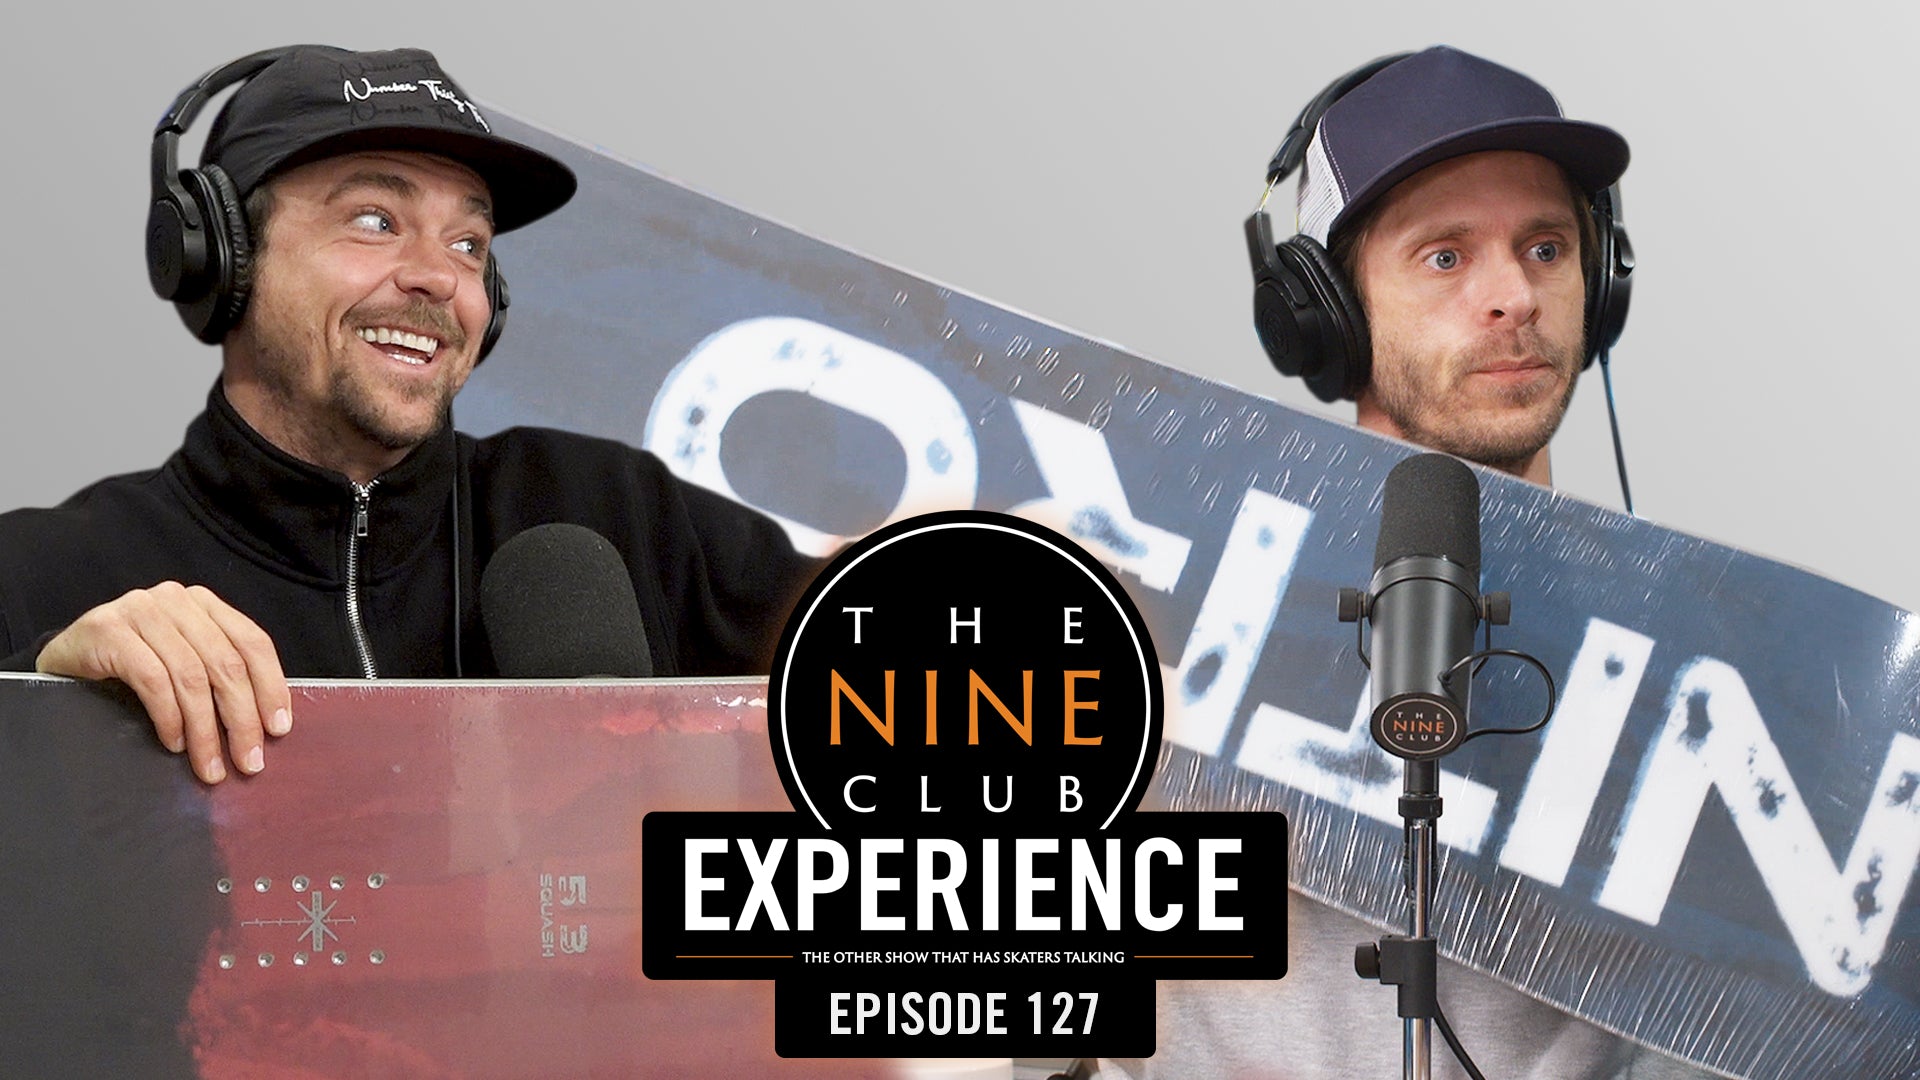 The Nine Club Experience episode 127